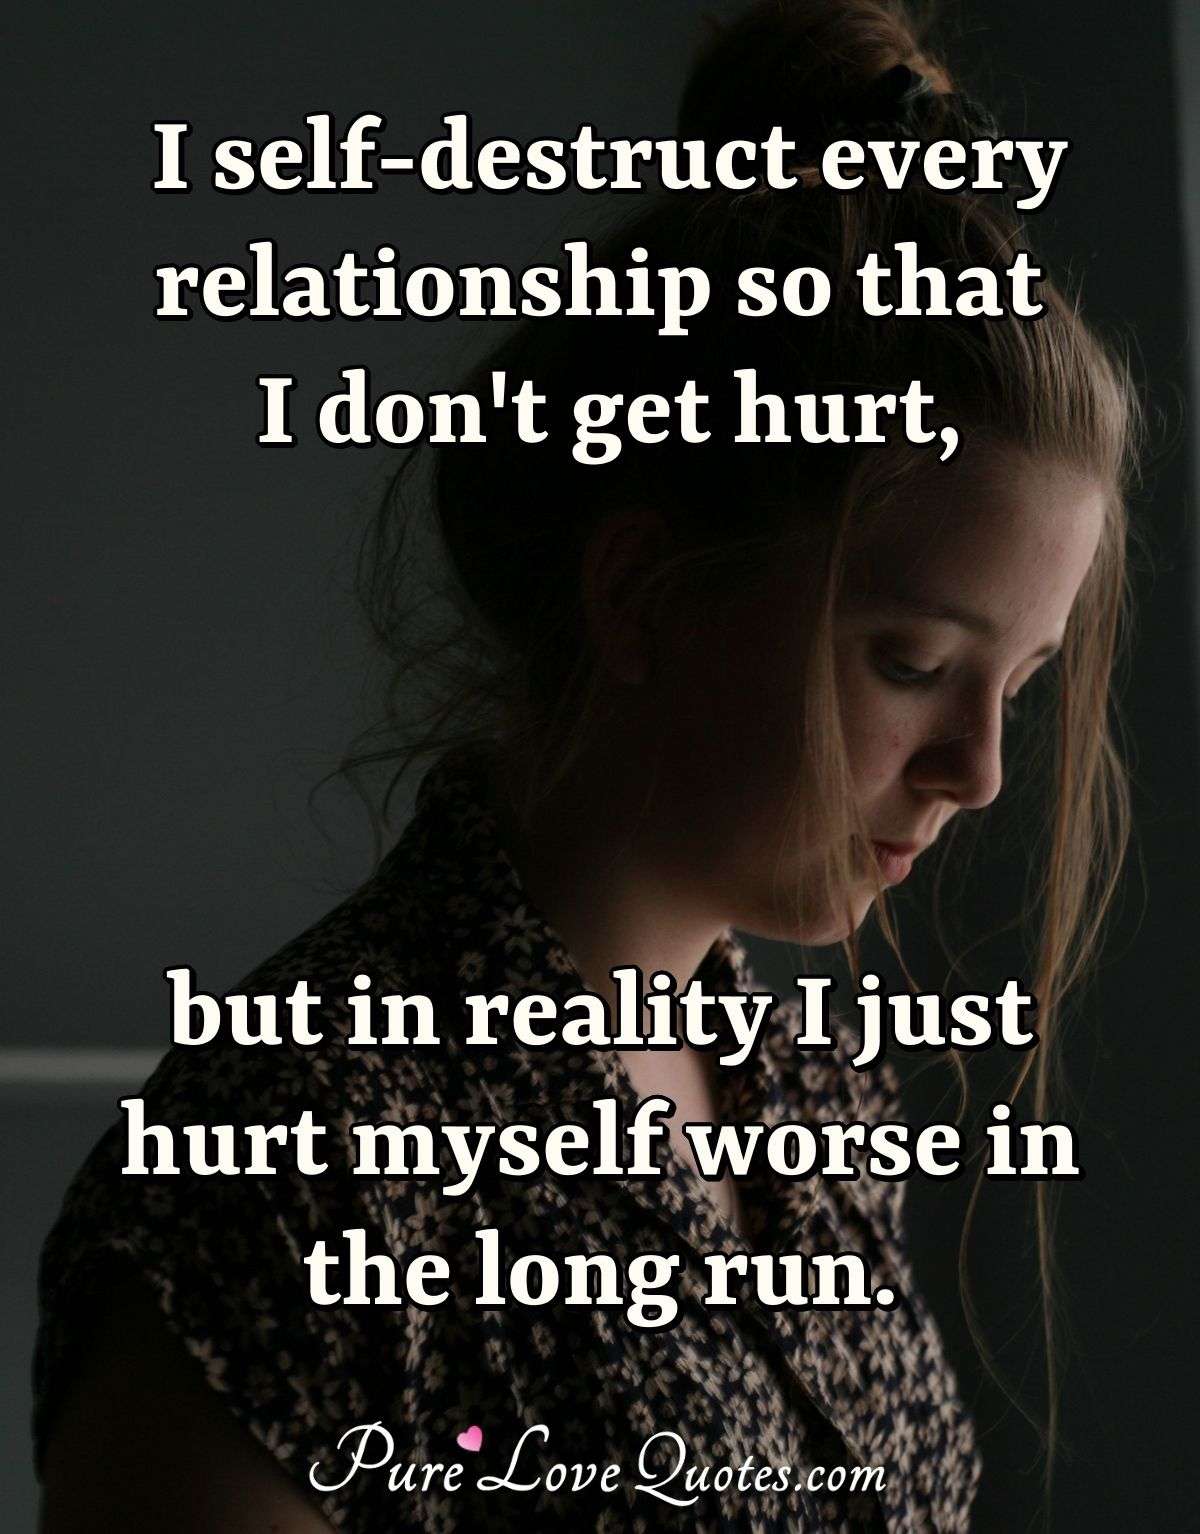 Relationship hurts quotes